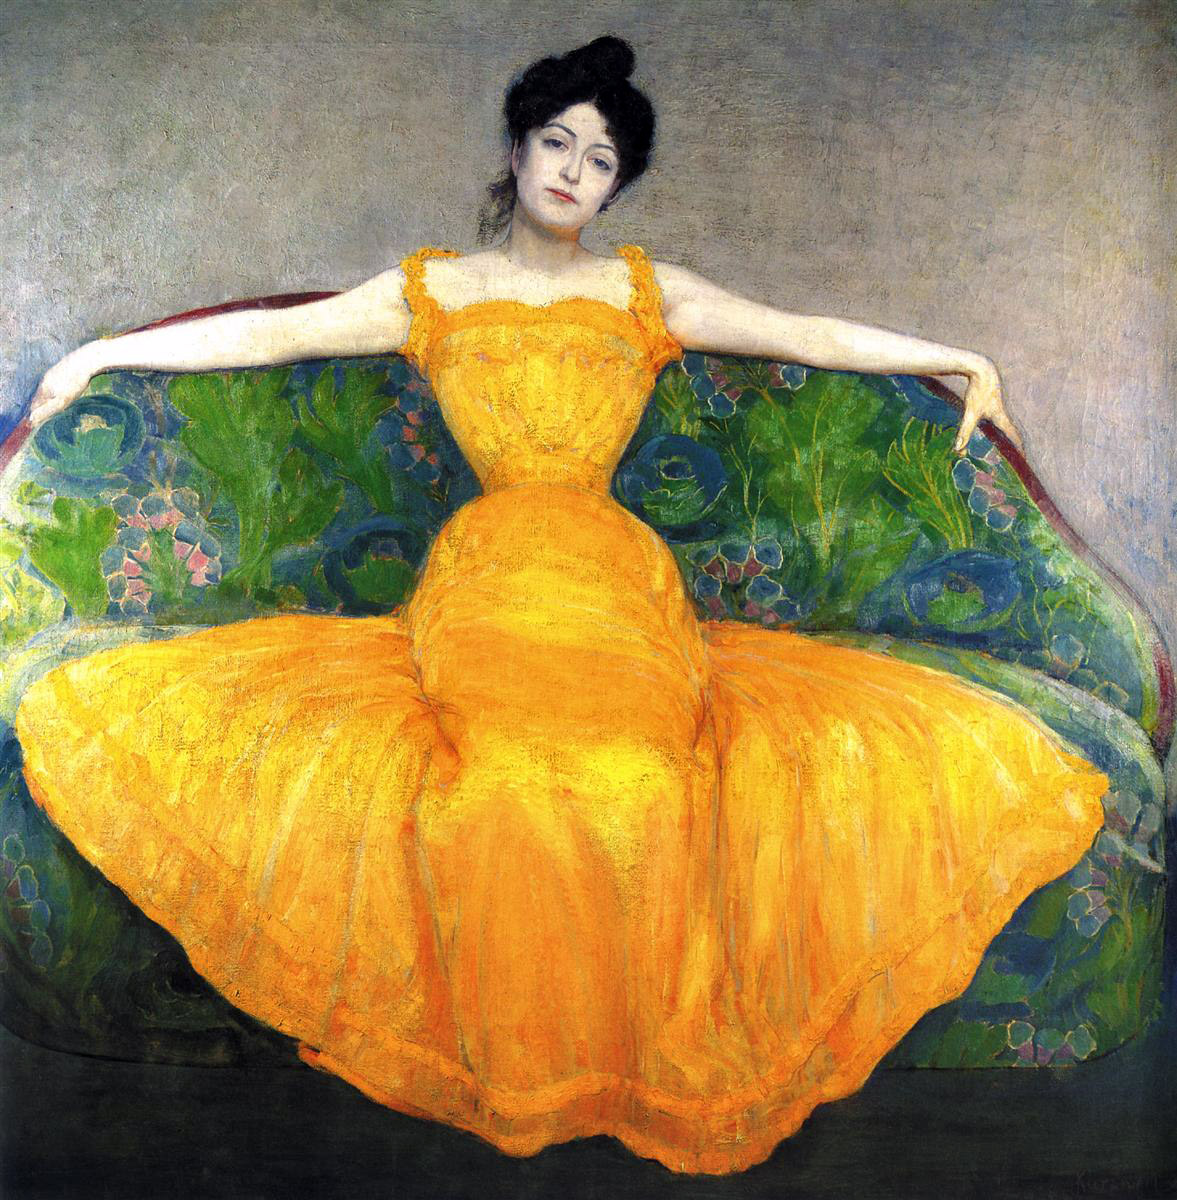 The lady in yellow dress